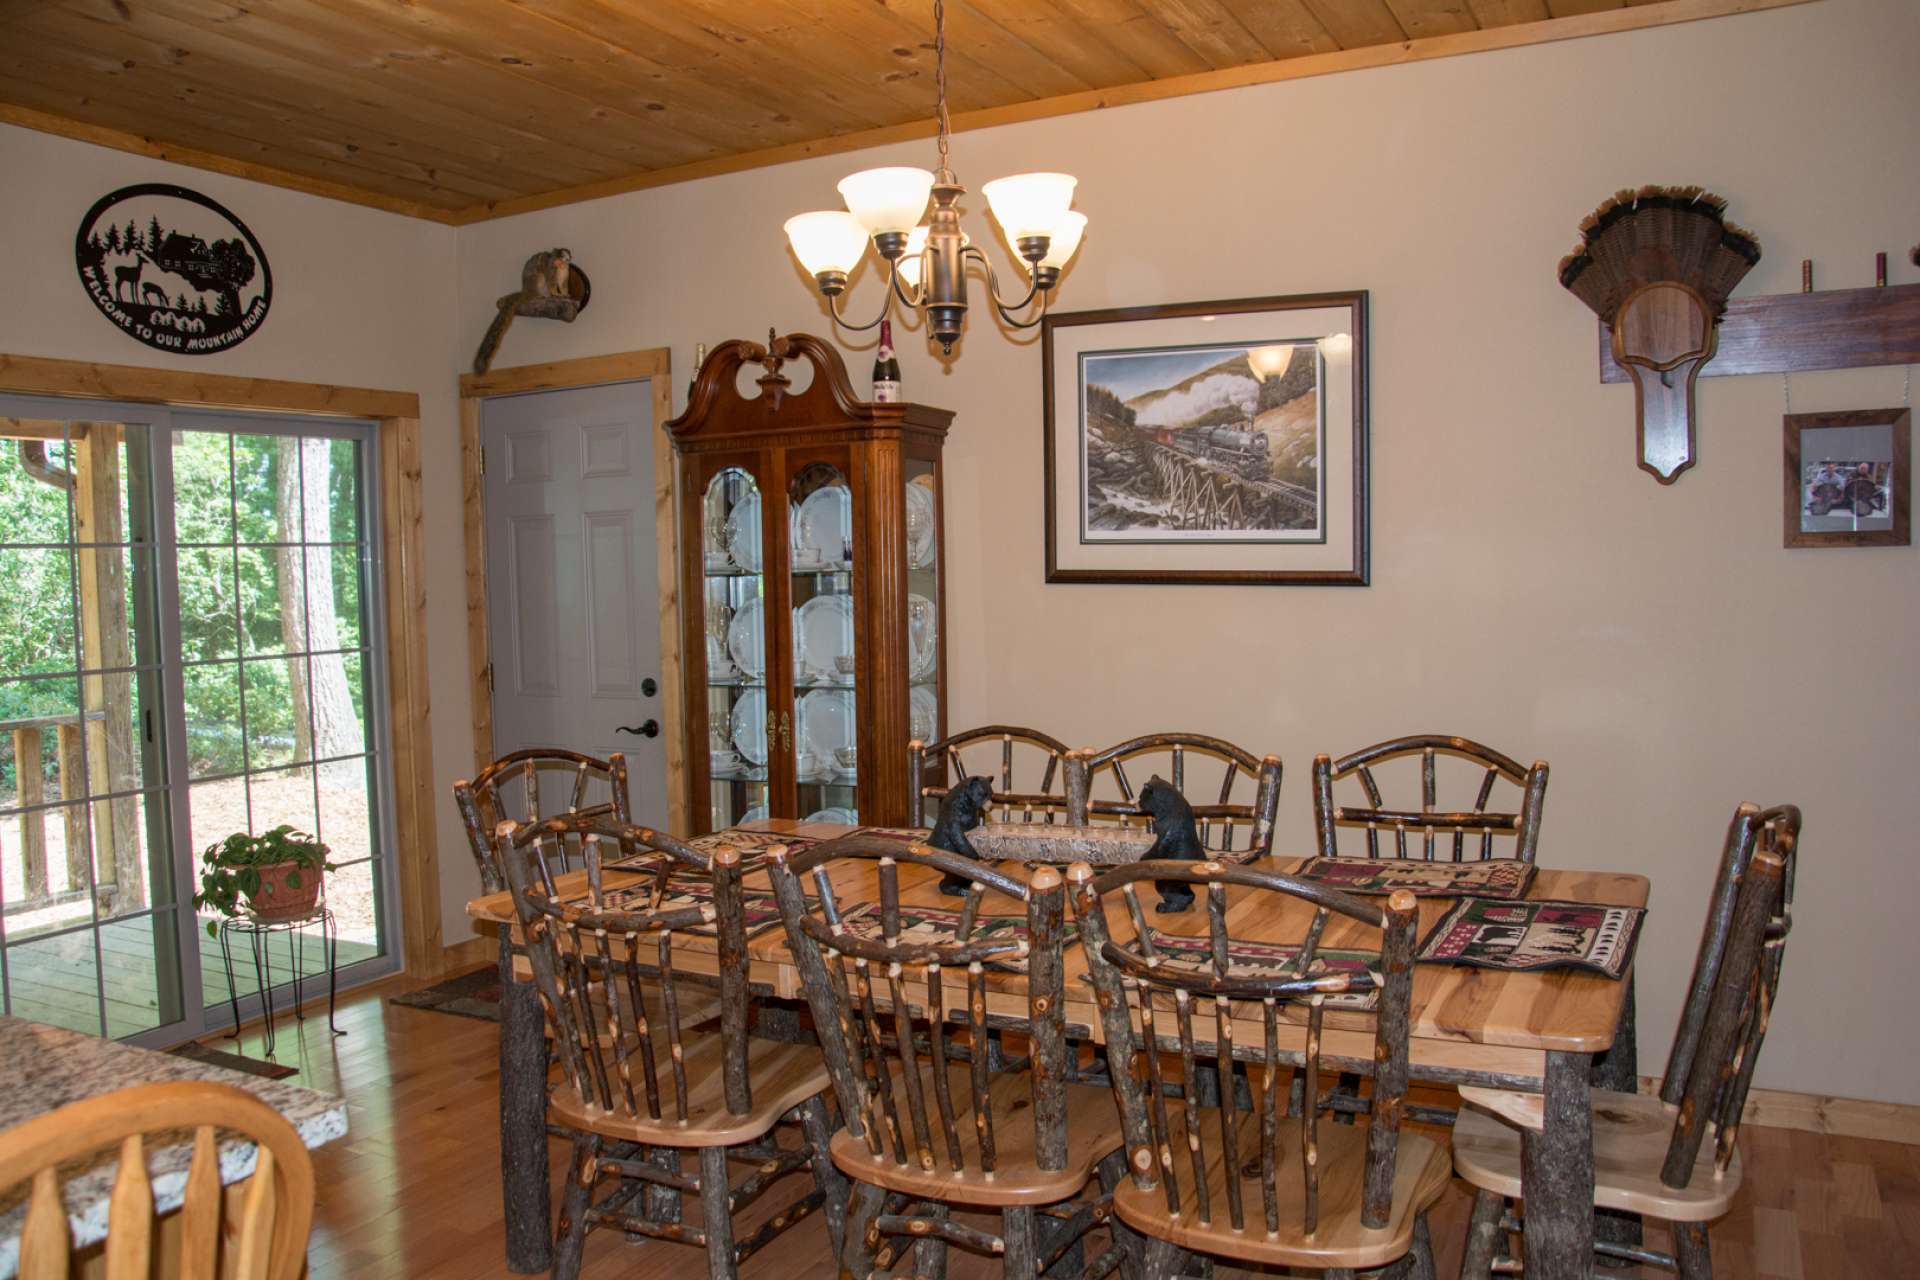 The kitchen and dining area also offers easy access to the back deck for outdoor entertaining.